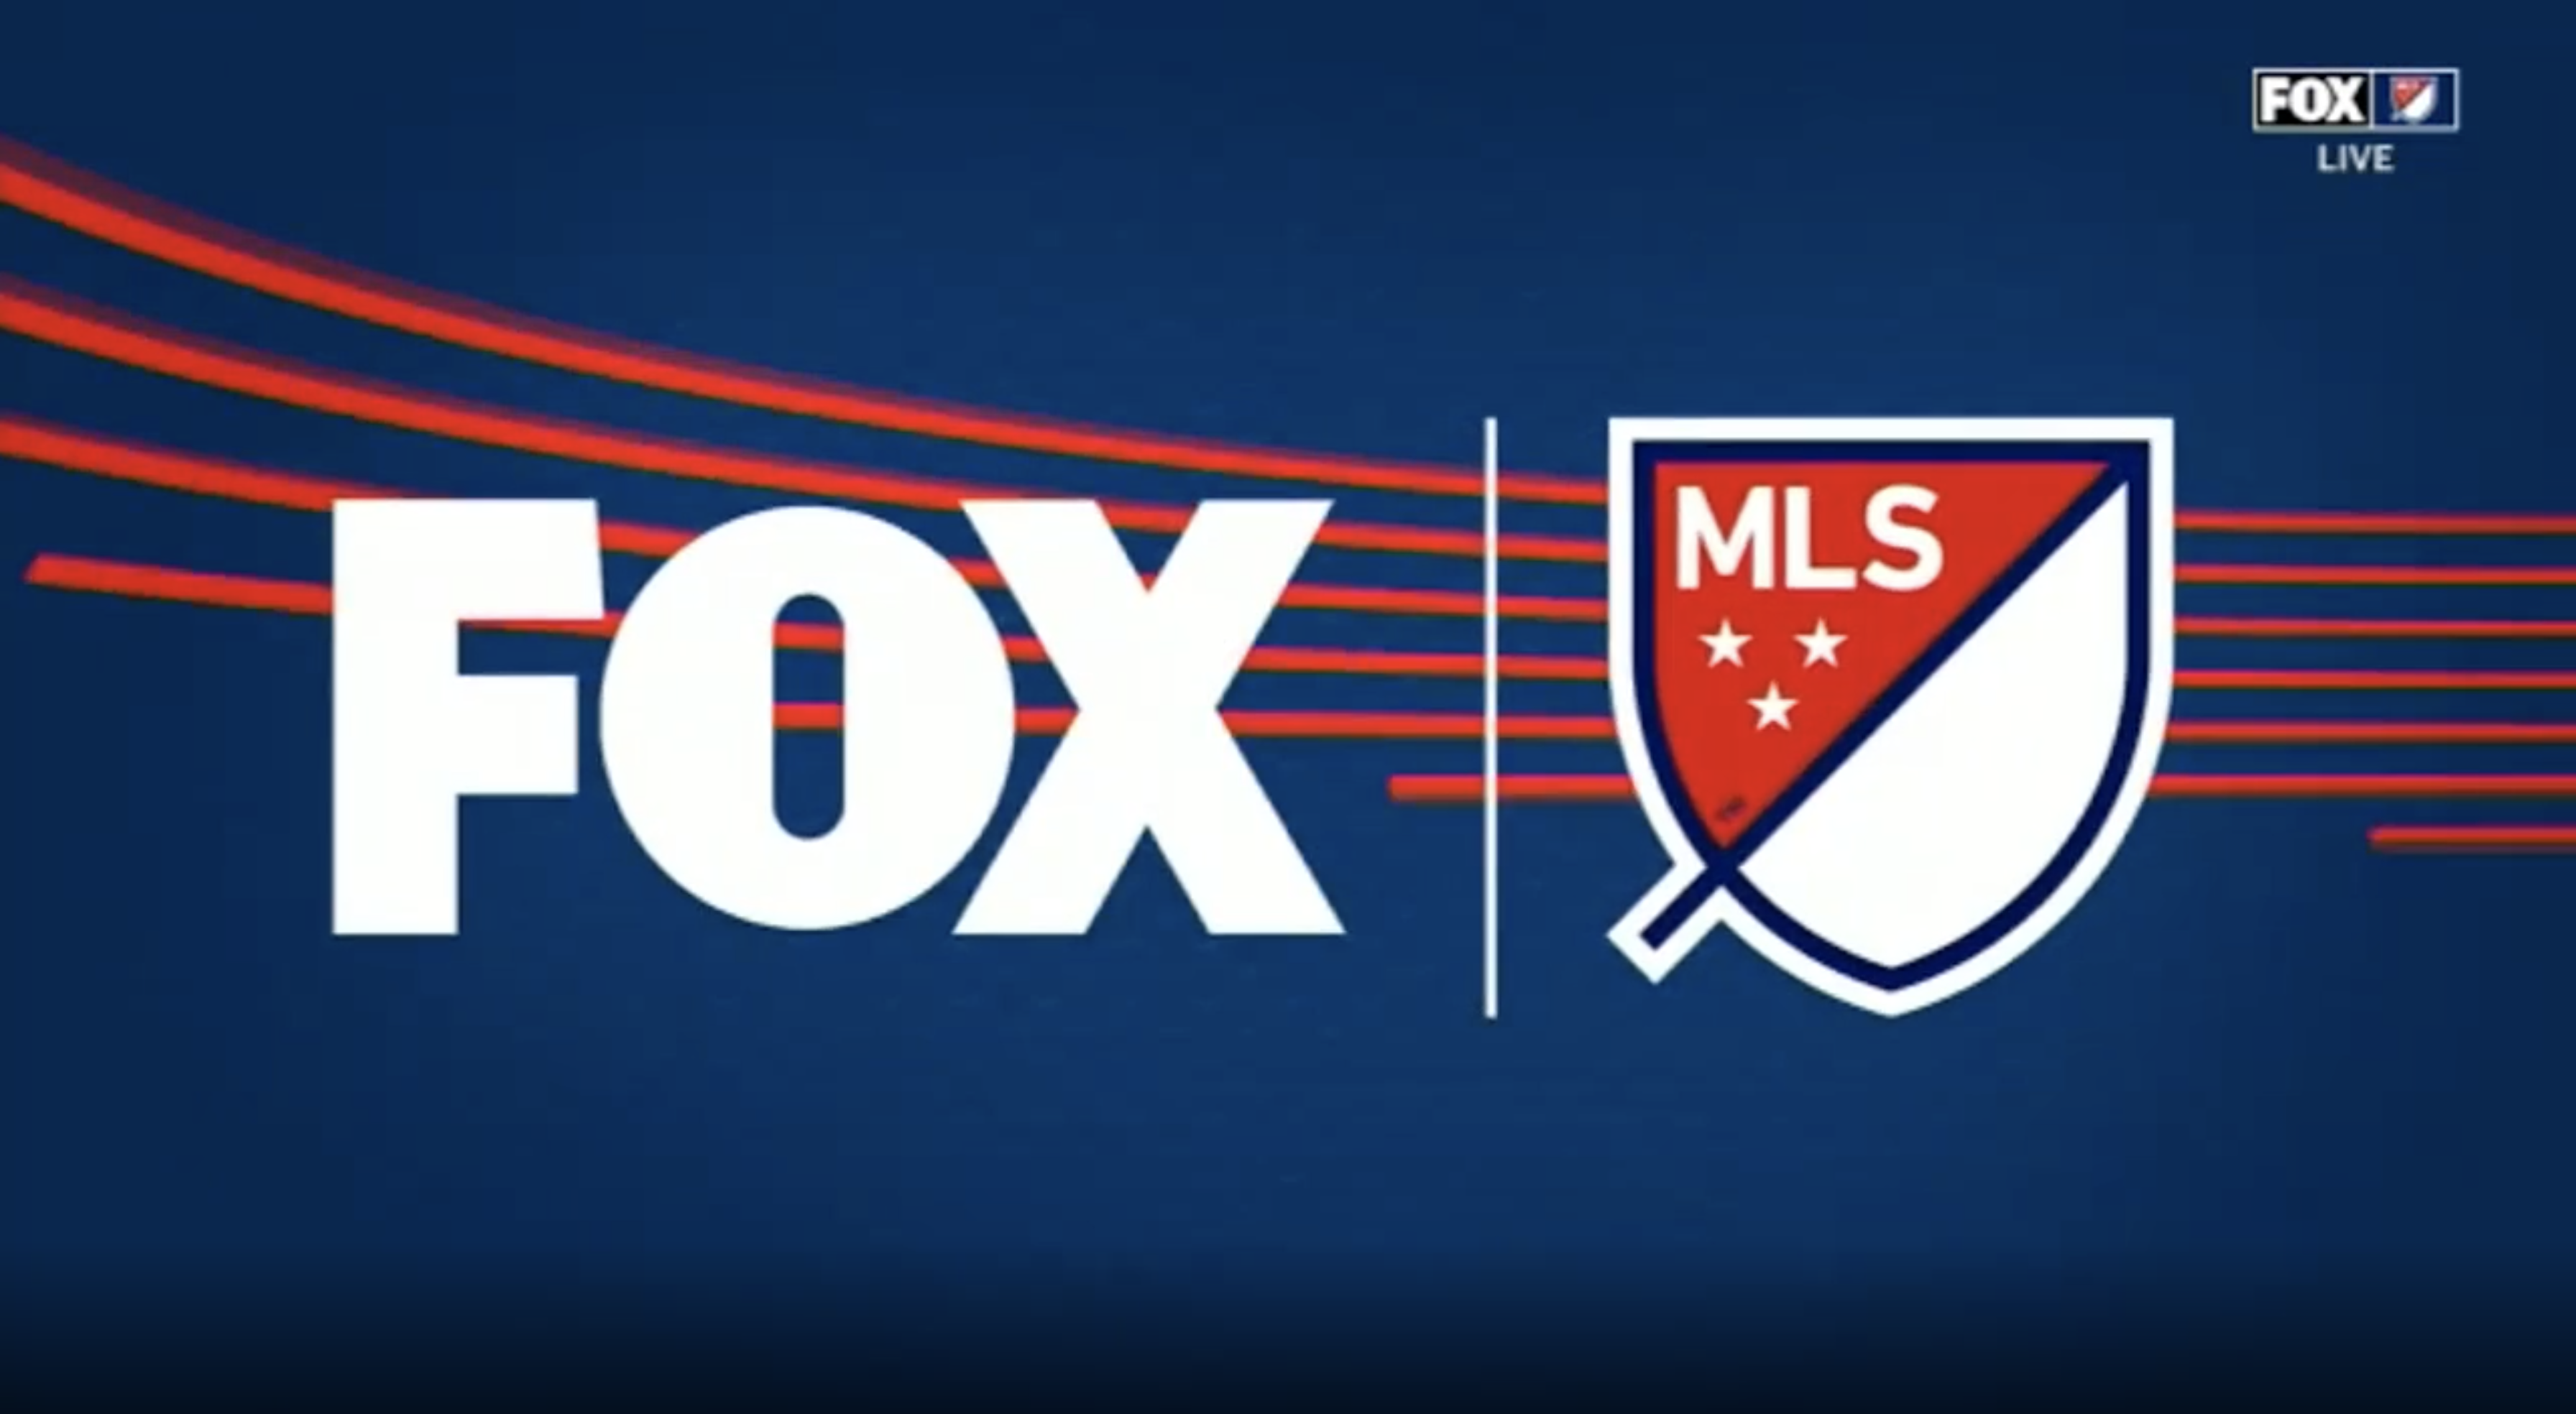 MLS 2022 Preview Fox Sports Covers Matches from the Air With Live Helicopter, Debuts New Graphics Package